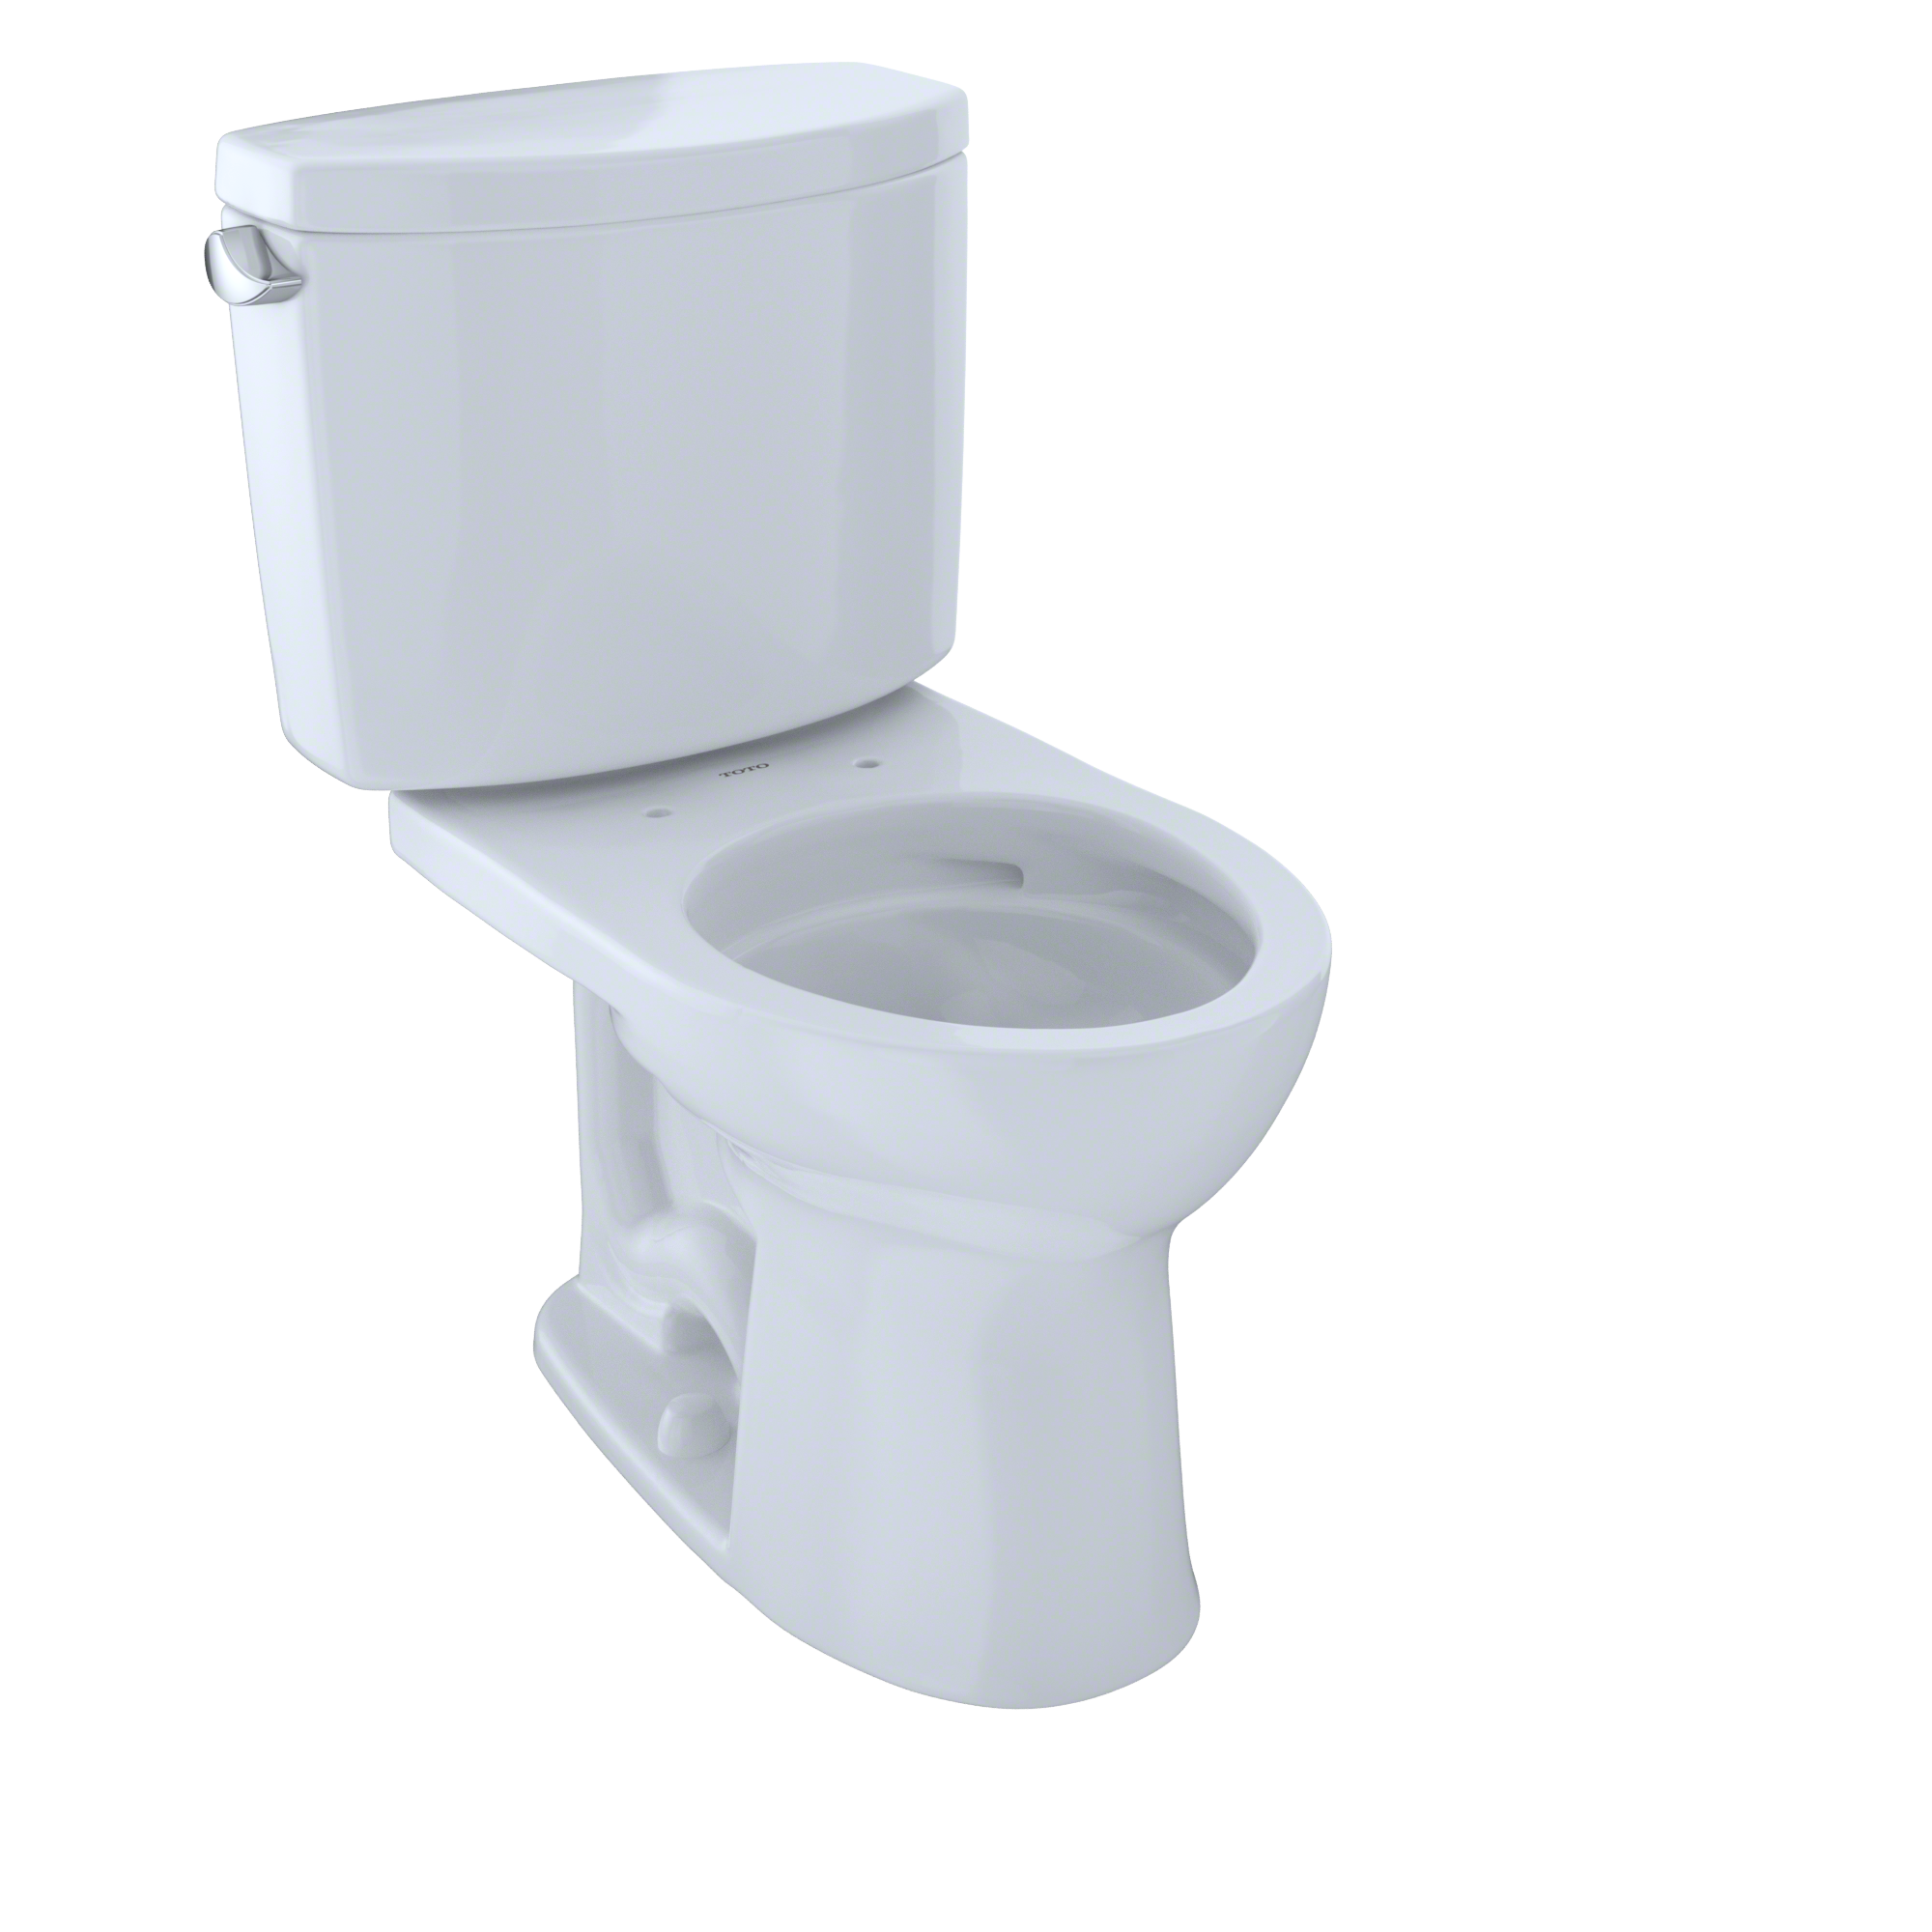 TOTO® Drake® II Two-Piece Round 1.28 GPF Universal Height Toilet with CEFIONTECT, Cotton White - CST453CEFG#01 - image 1 of 5